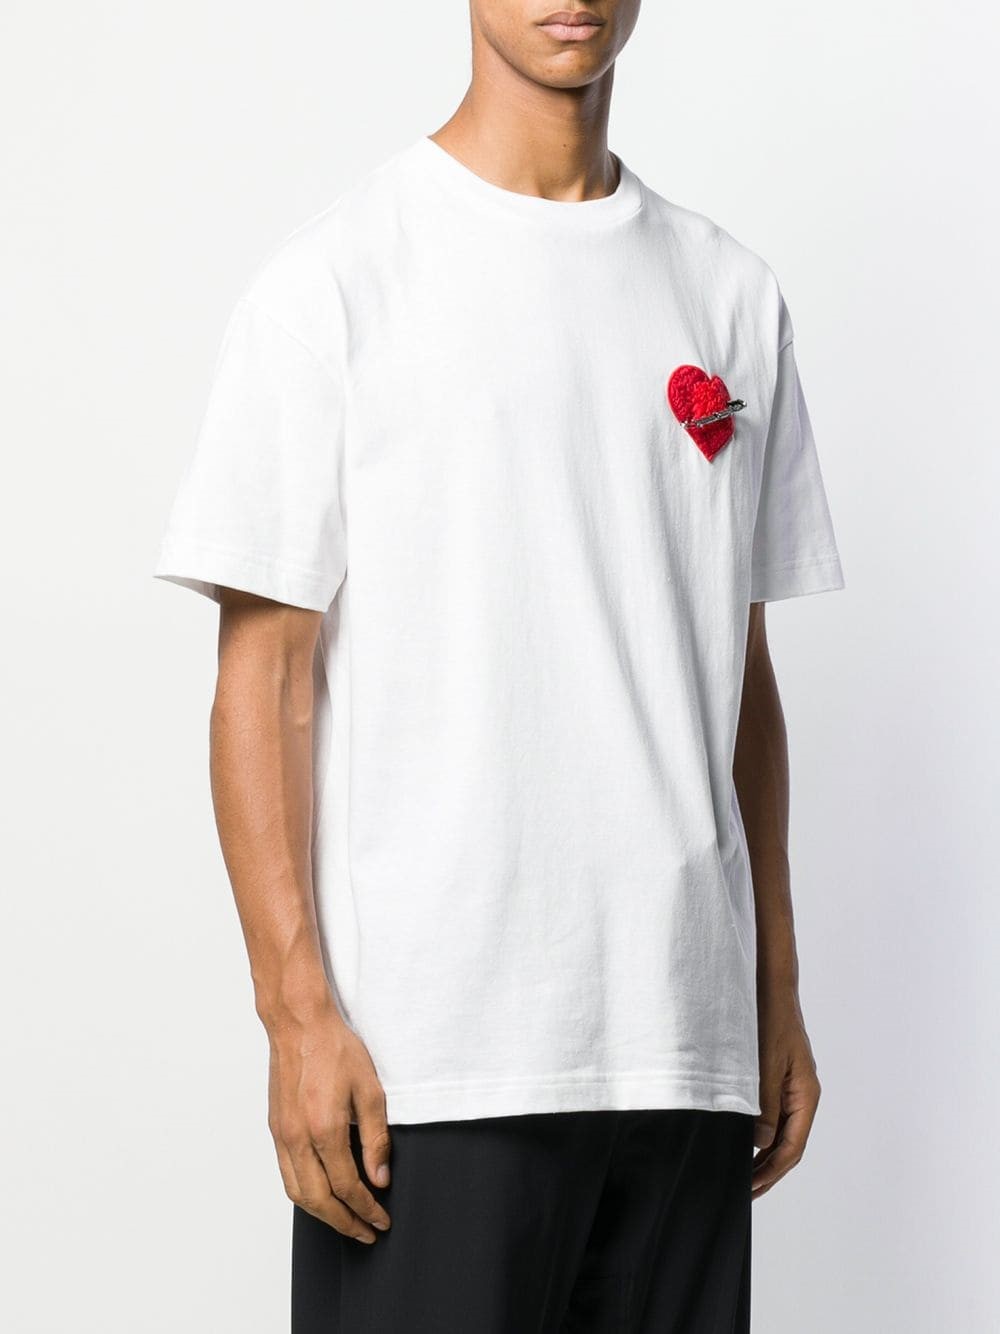 palm angels HEART PRINT T-SHIRT available on montiboutique.com - 30271